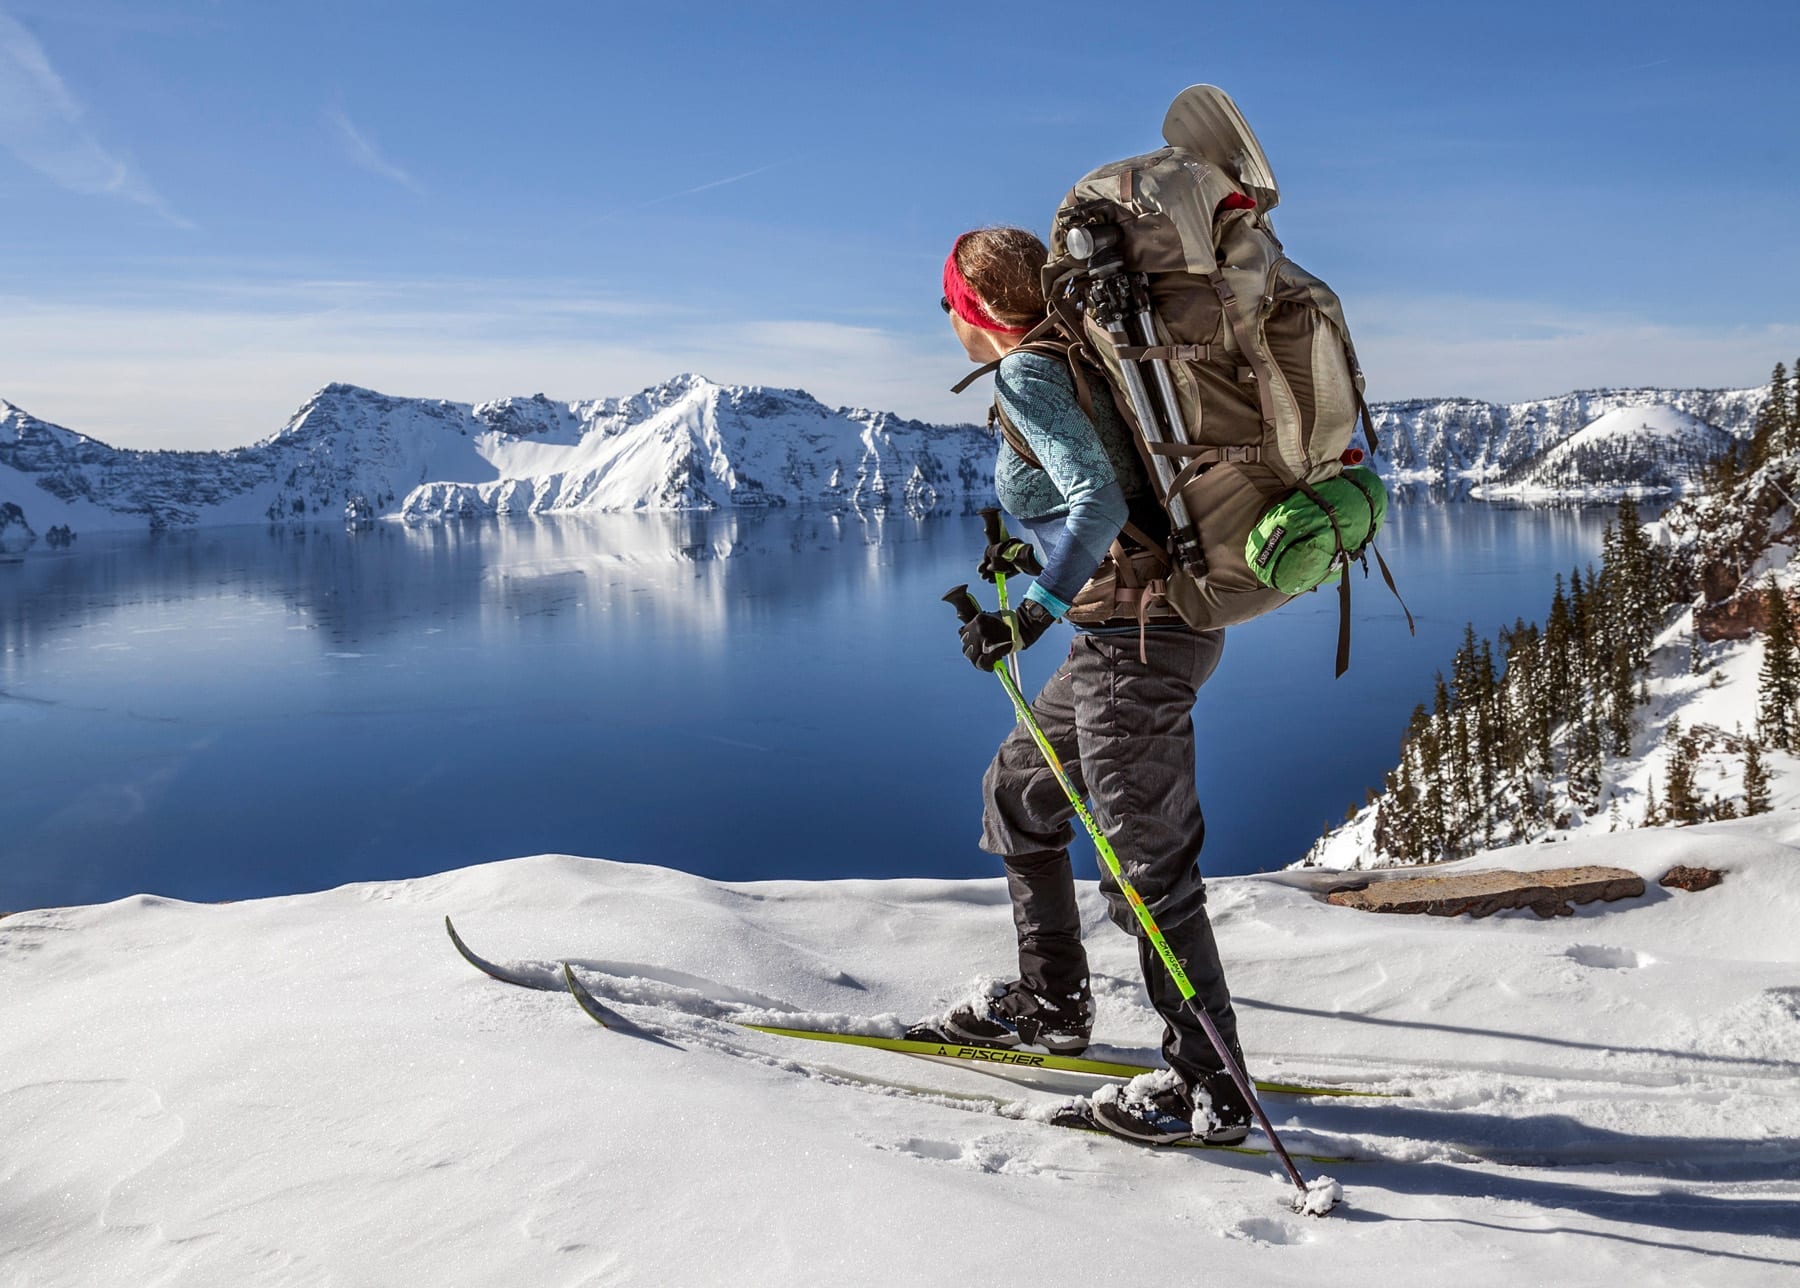 Cross-country skiing at Crater Lake an adventure from Bend, Oregon